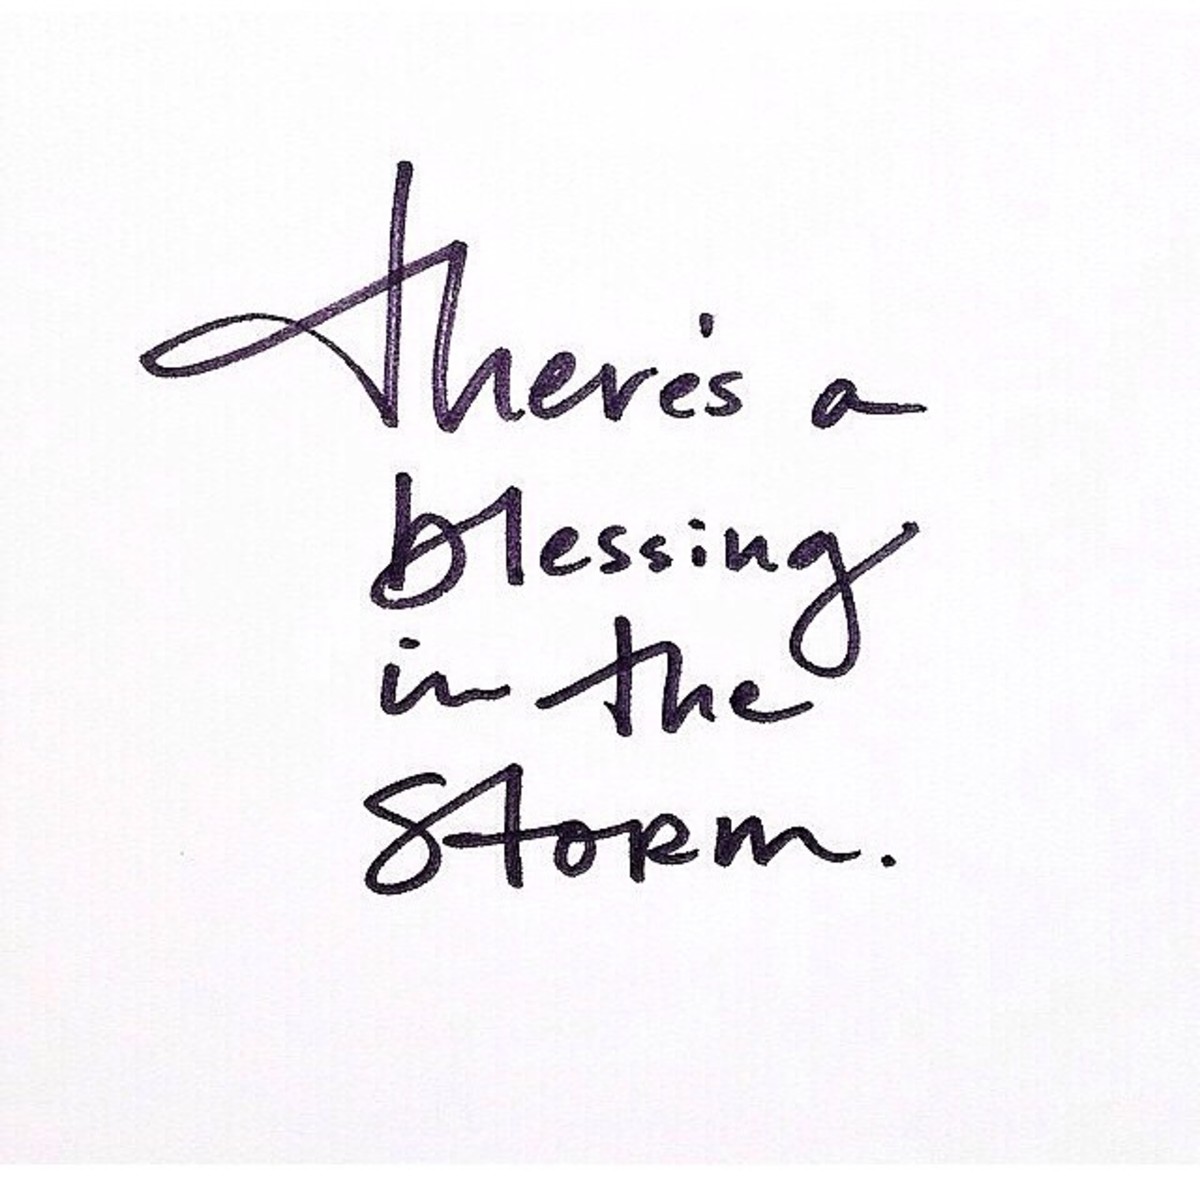 "There's a blessing in the storm."